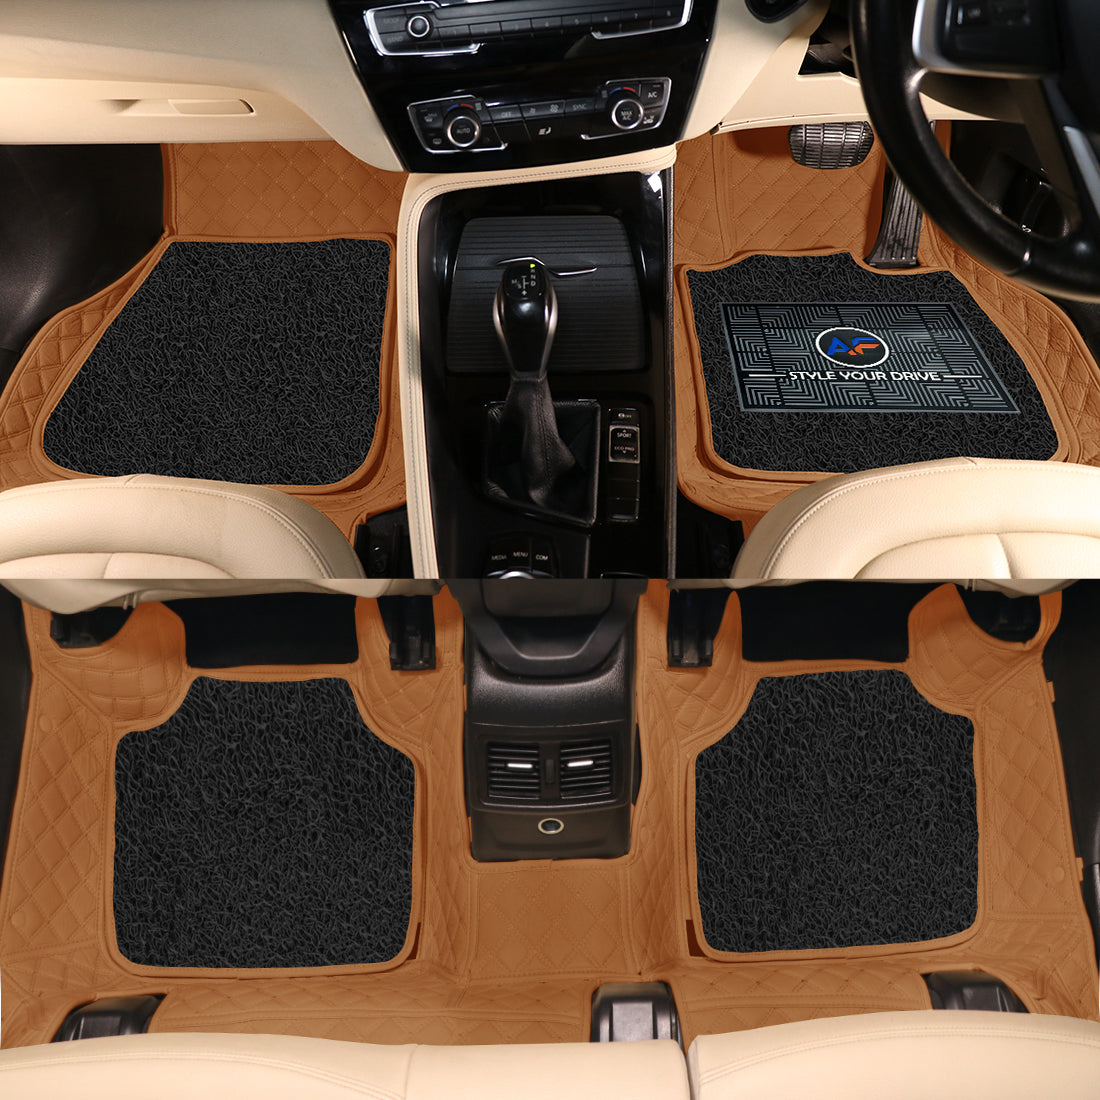 Jaguar XF 2020 7D Luxury Car Mat, All Weather Proof, Anti-Skid, 100% Waterproof & Odorless with Unique Diamond Fish Design (24mm Luxury PU Leather, 2 Rows)